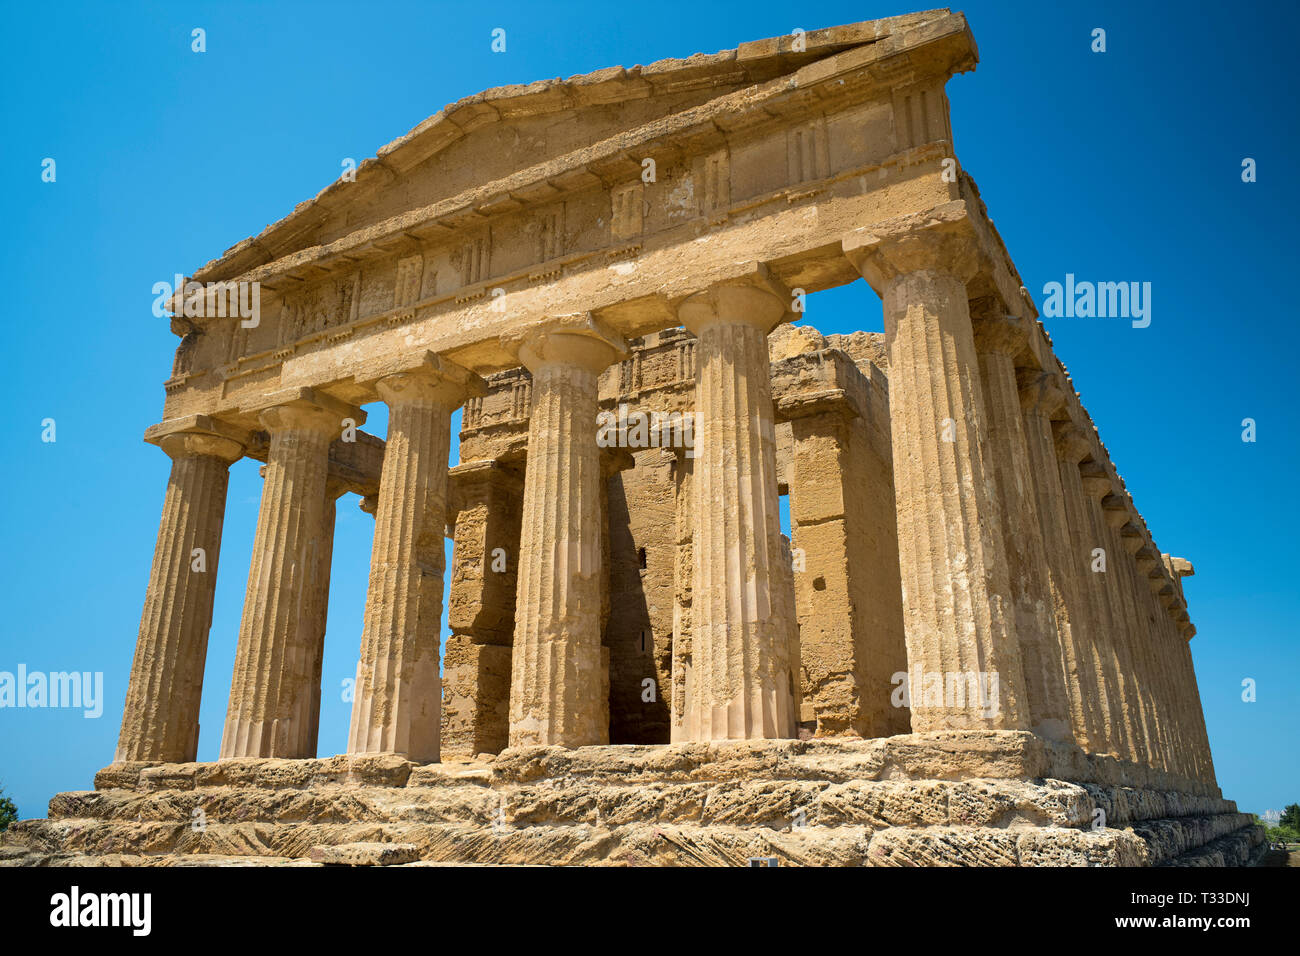 Temple of Concord ( Concordia) low angle view of the columns, in the Valley of the Temples, Agrigento, Sicily, Italy Stock Photo